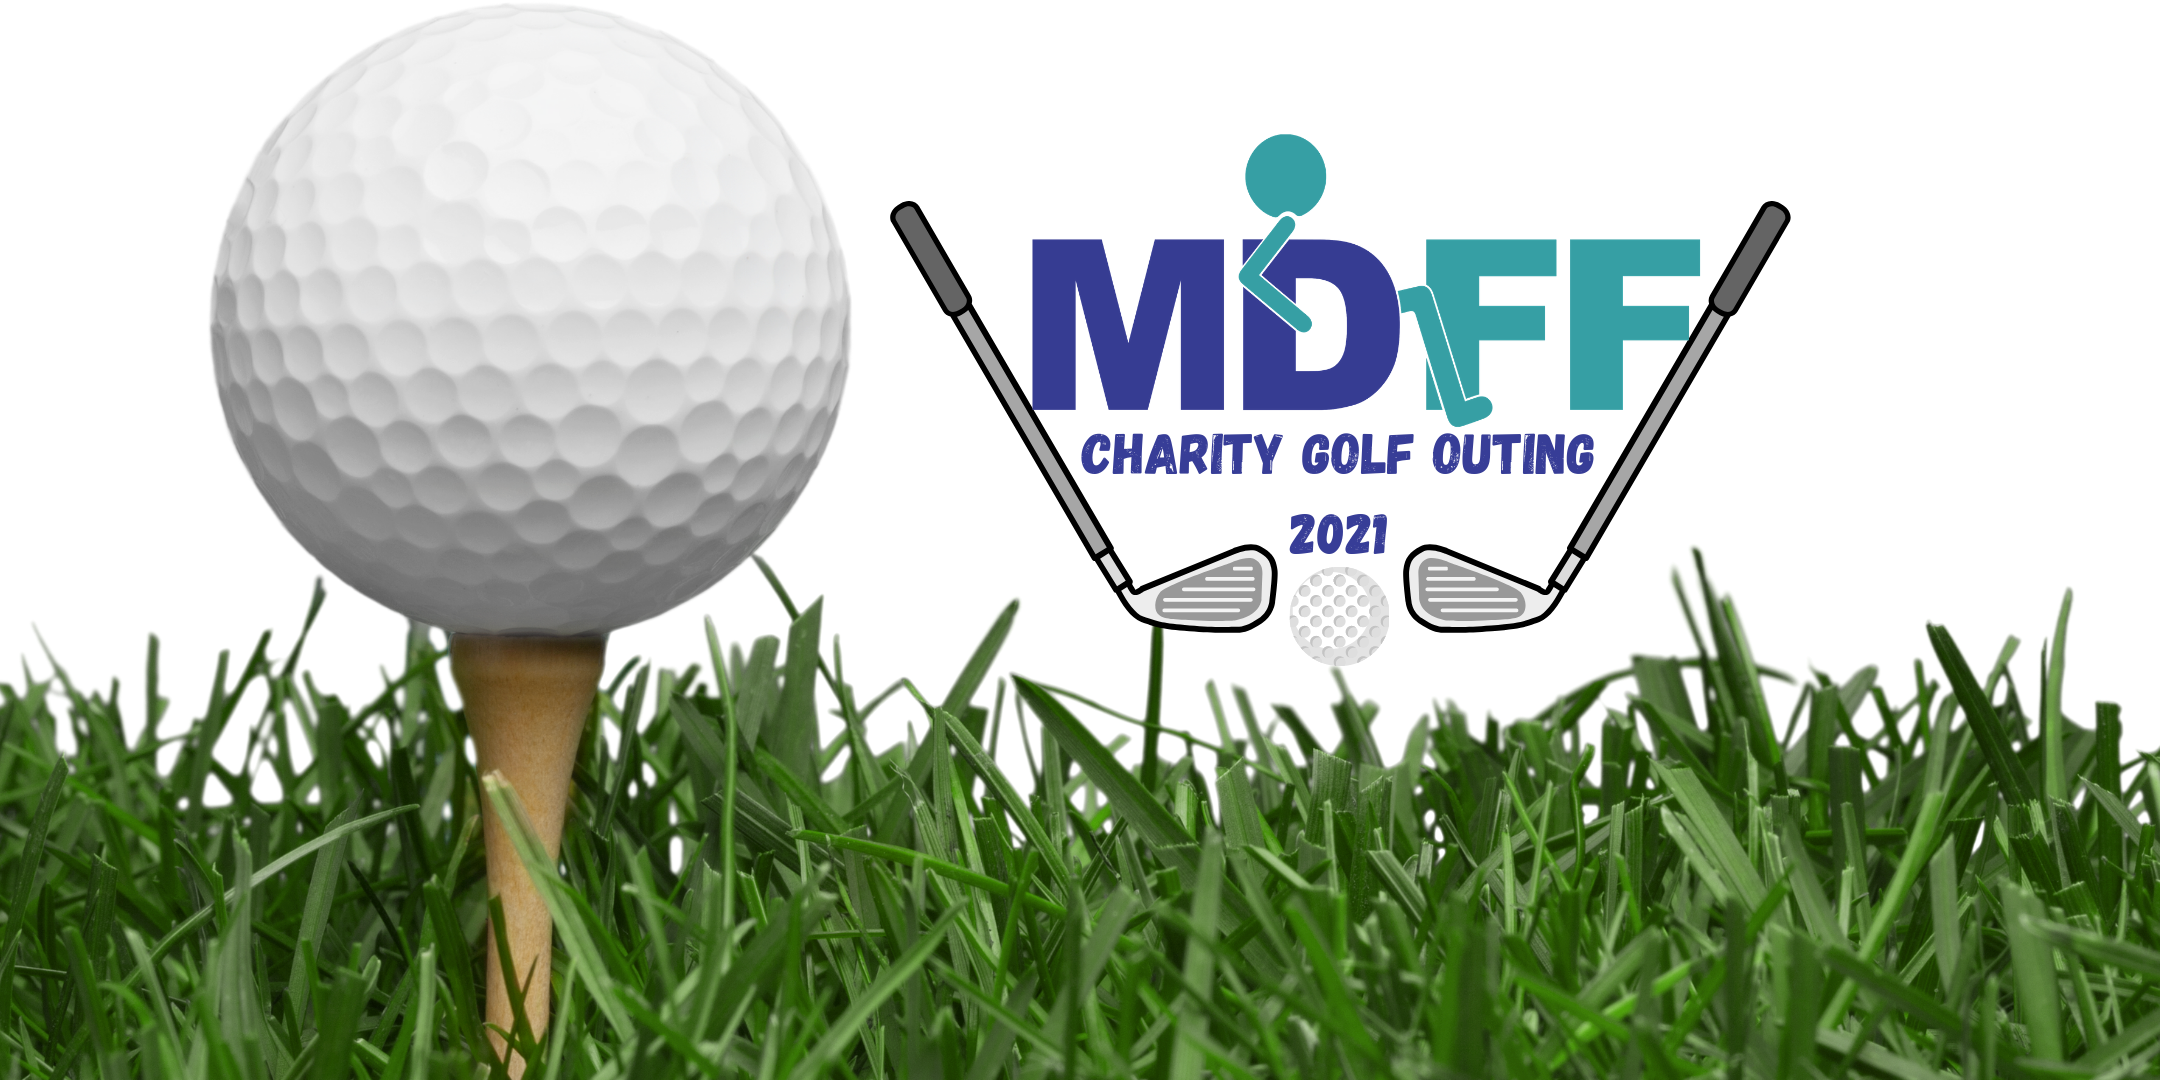 MDFF Charity Golf Outing